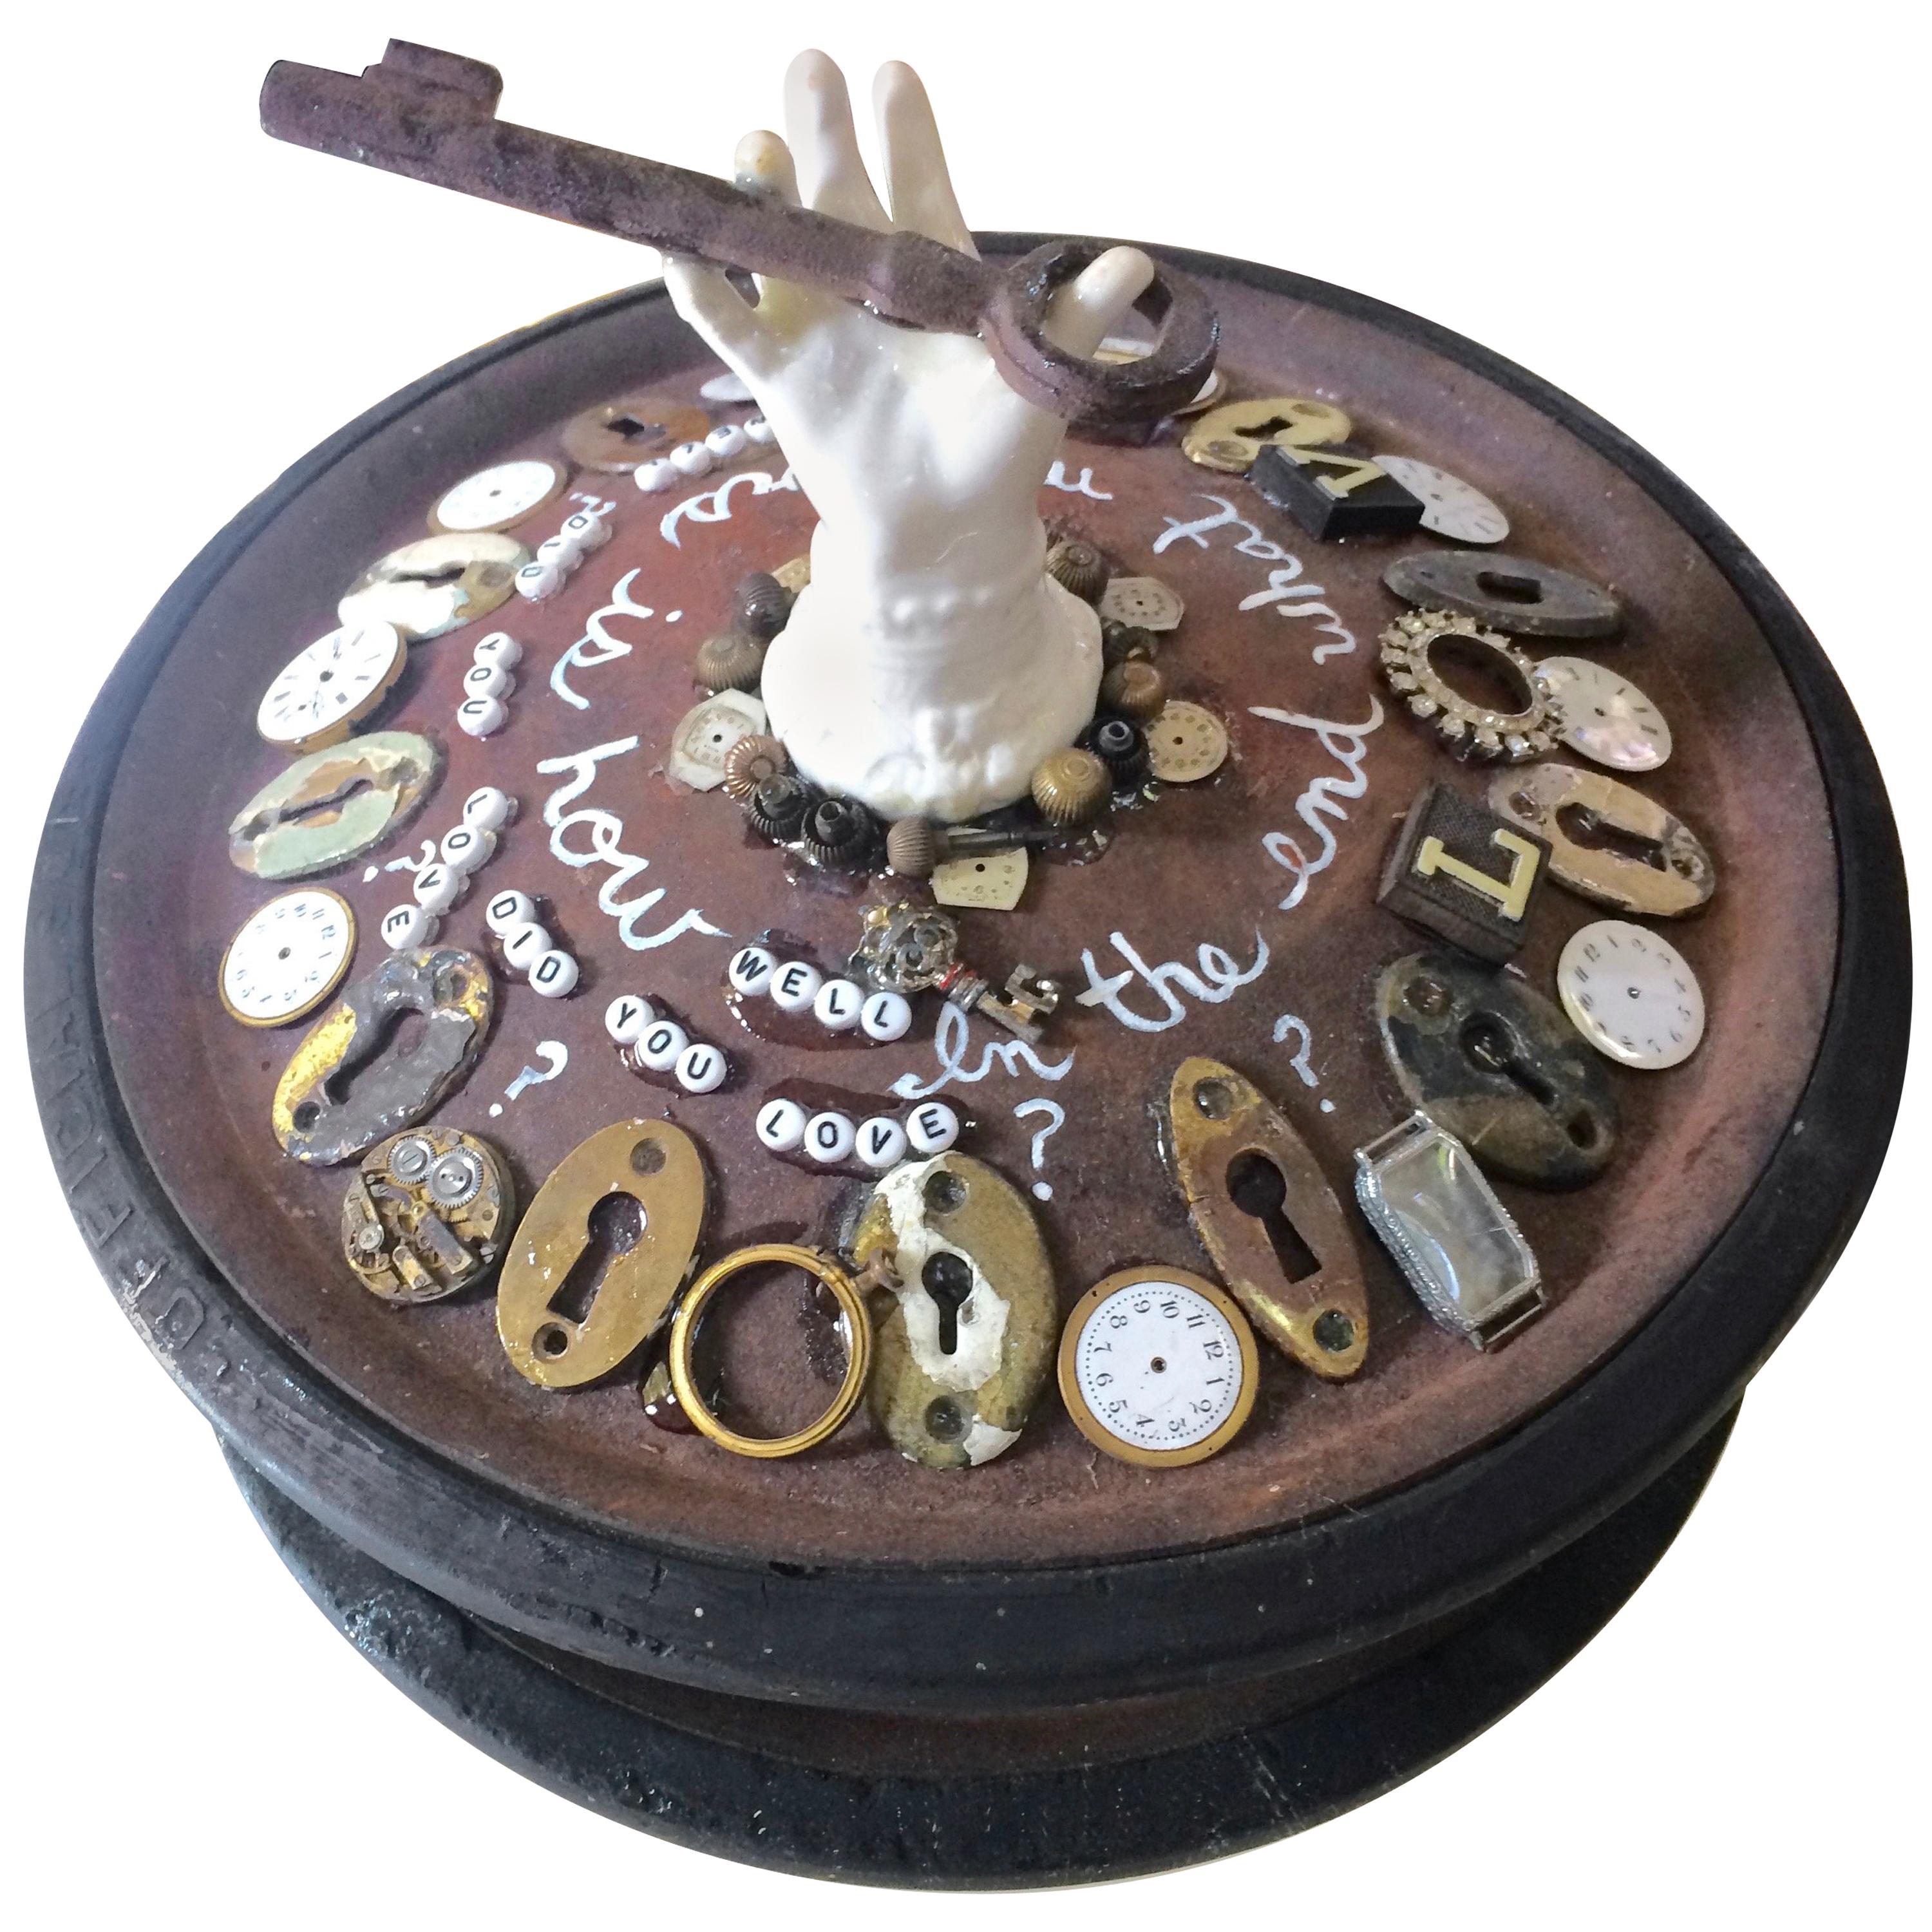 Mixed Media Tabletop Sculpture with Buddhist Message For Sale